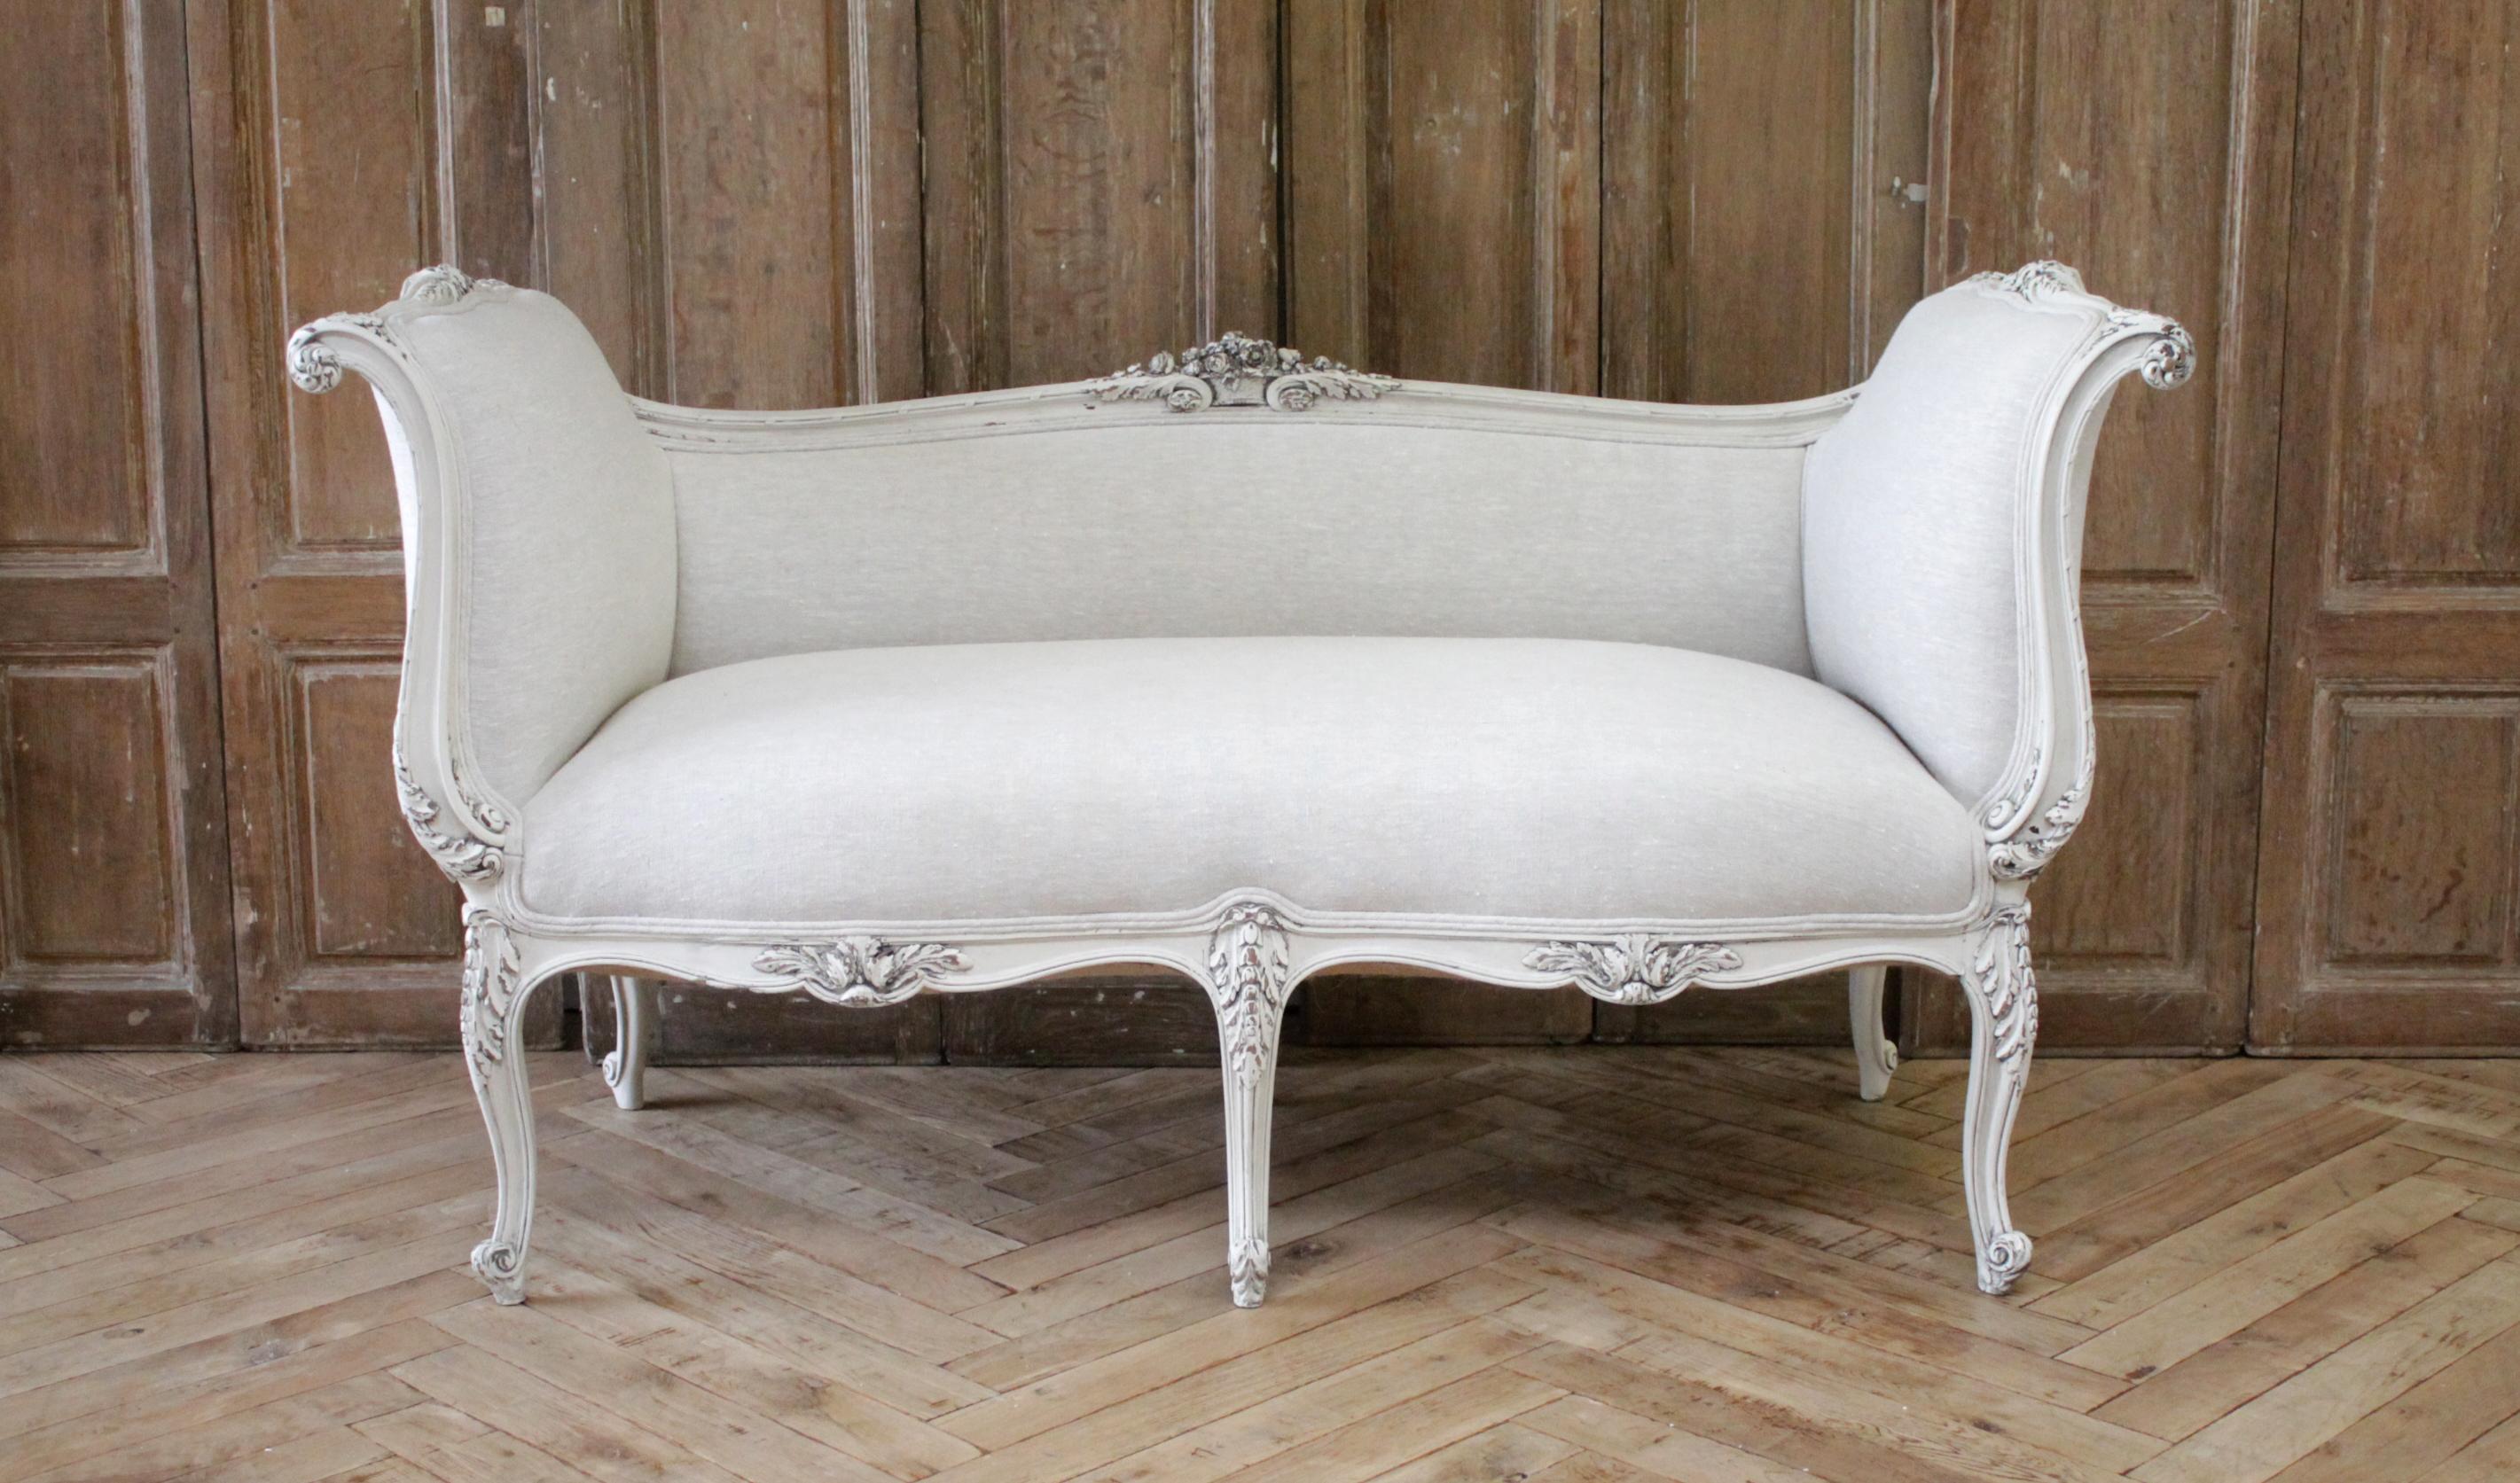 Antique Louis XV style French carved and upholstered settee bench
Painted in our oyster white finish, which is an off white with subtle distressing, and antique patina that has a grey hue.
A large carved basket of flowers with scrolled acanthus